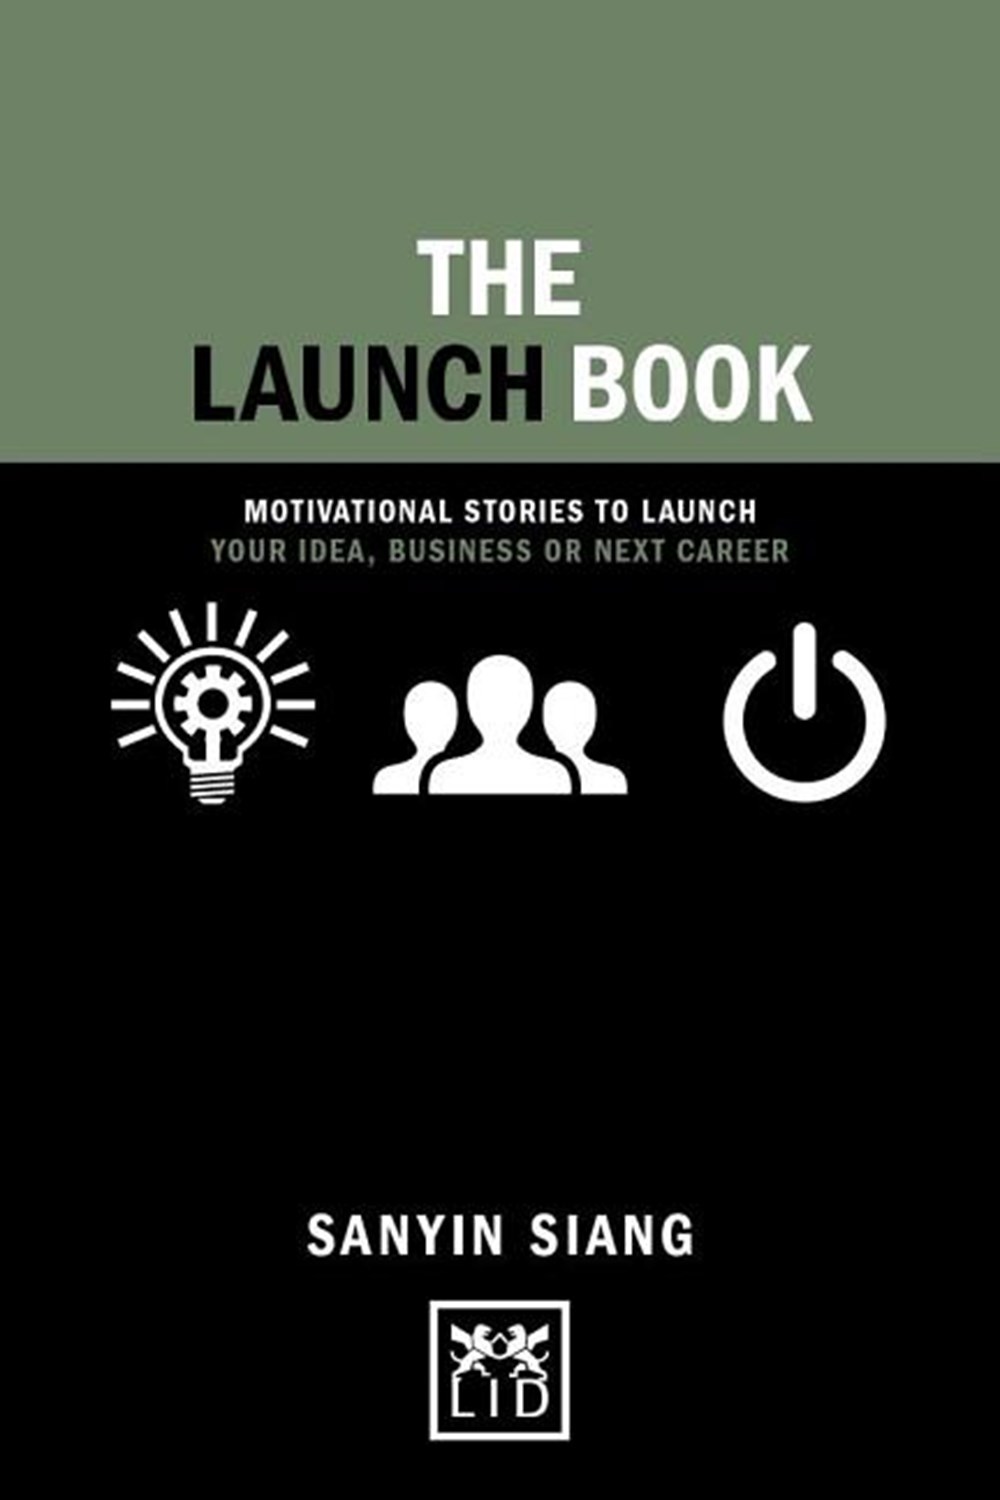 Launch Book: Motivational Stories to Launch Your Idea, Business or Next Career